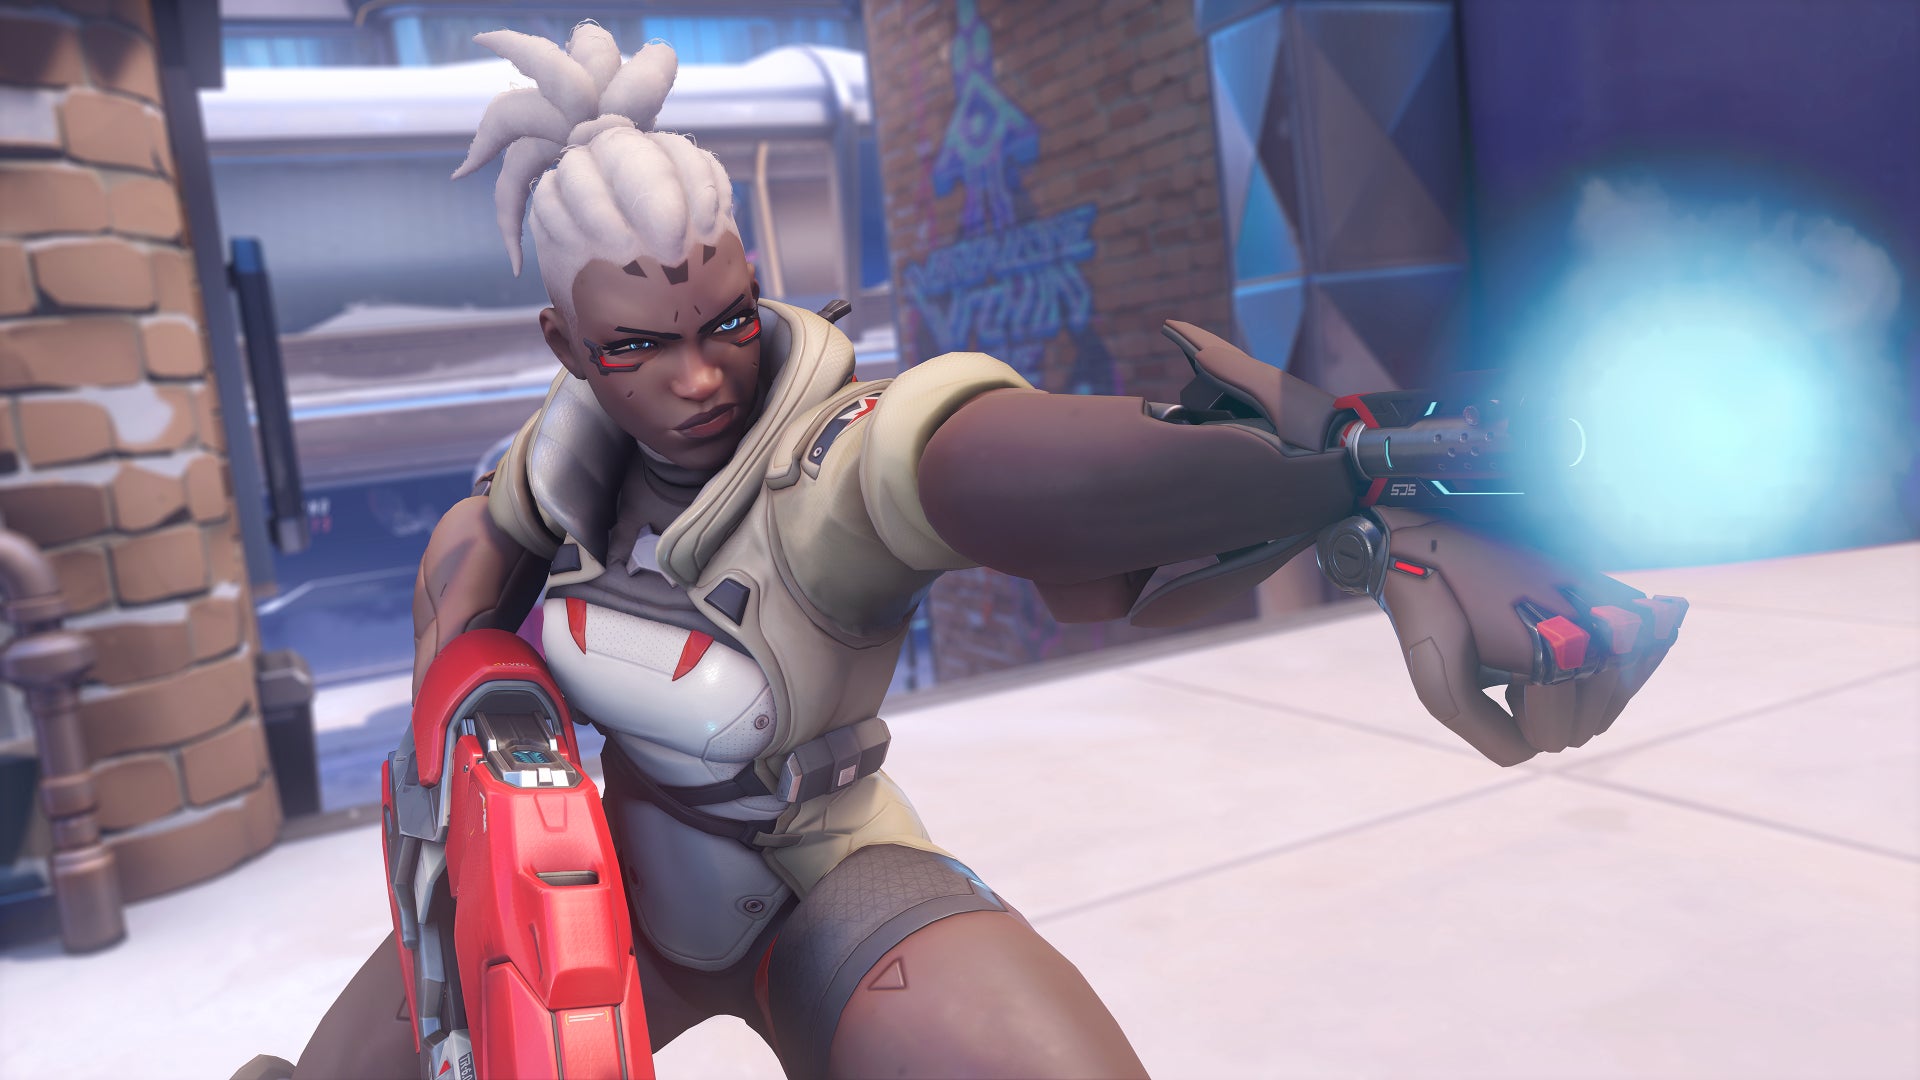 Sojourn, a hero in Overwatch 2, fires a rocket from a launcher in her arm.